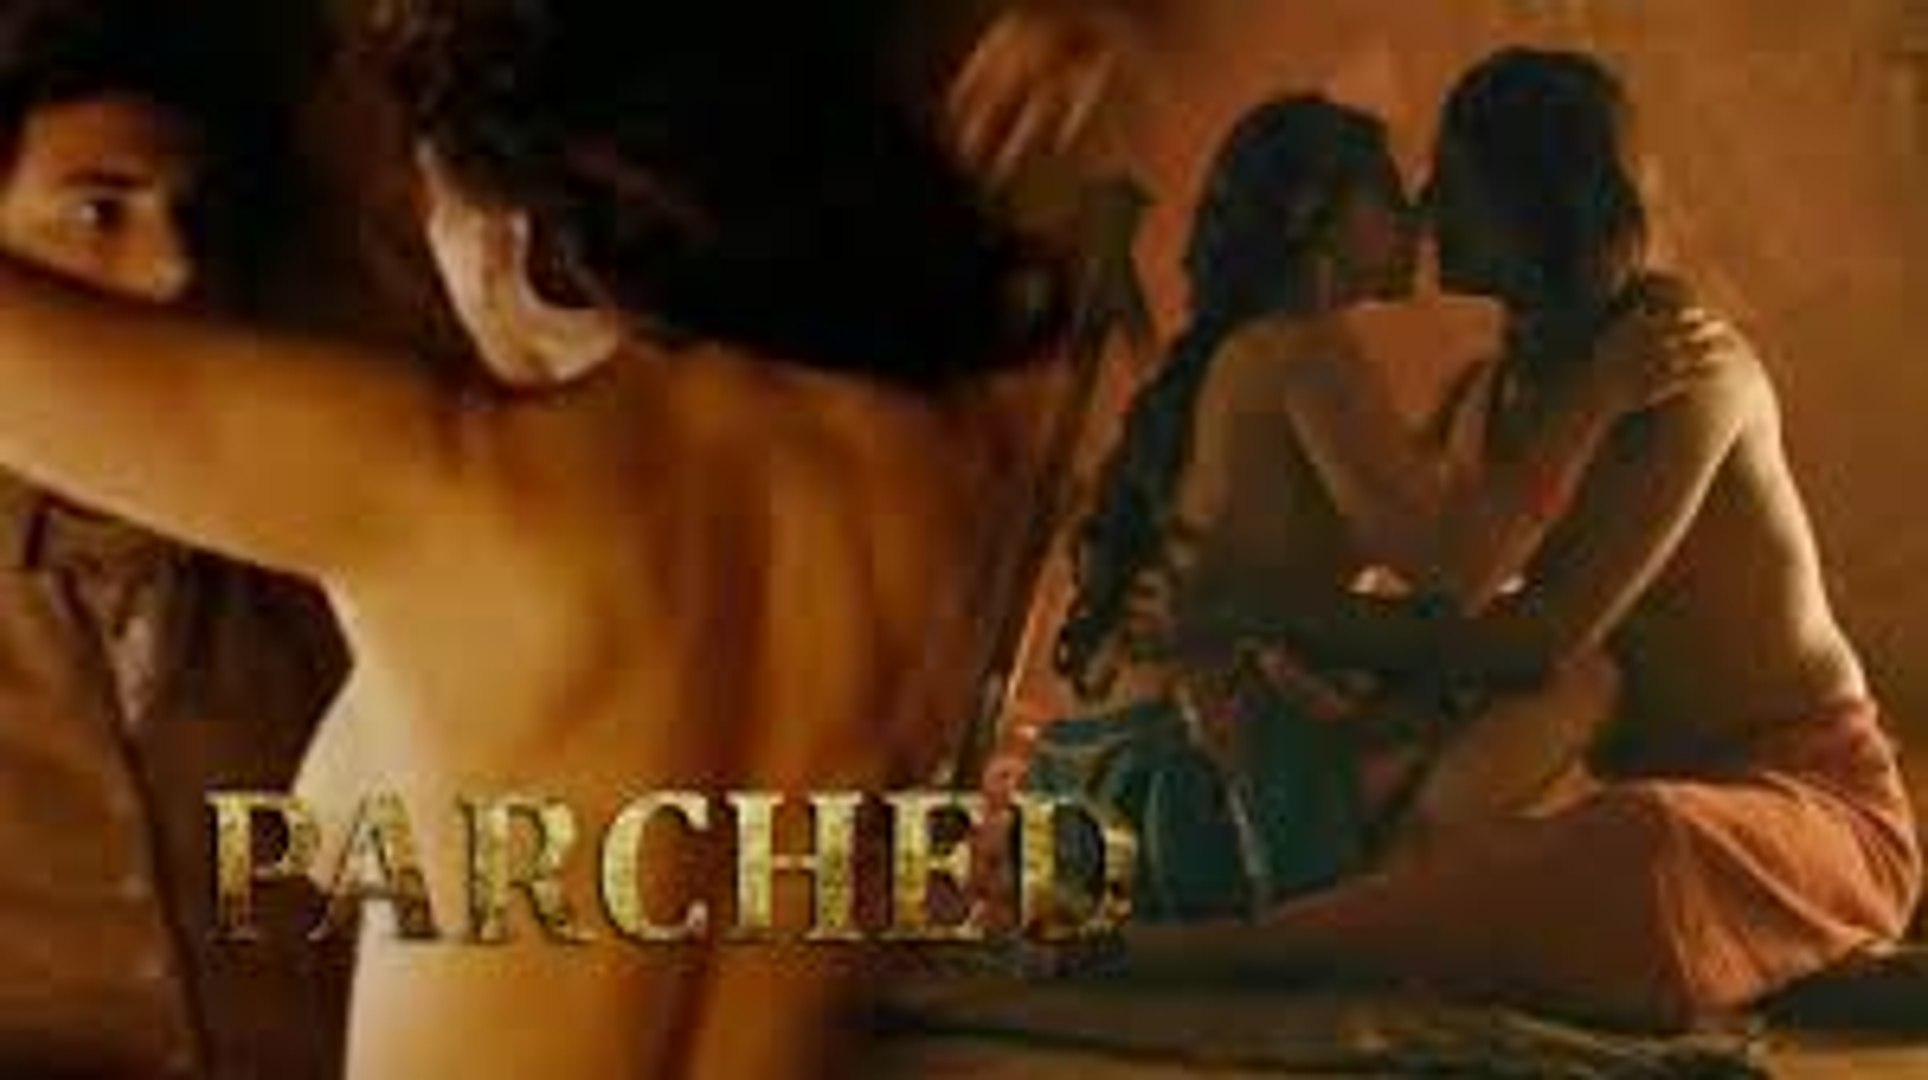 Parched - UNRATED - Dvd Part-1 - video dailymotion